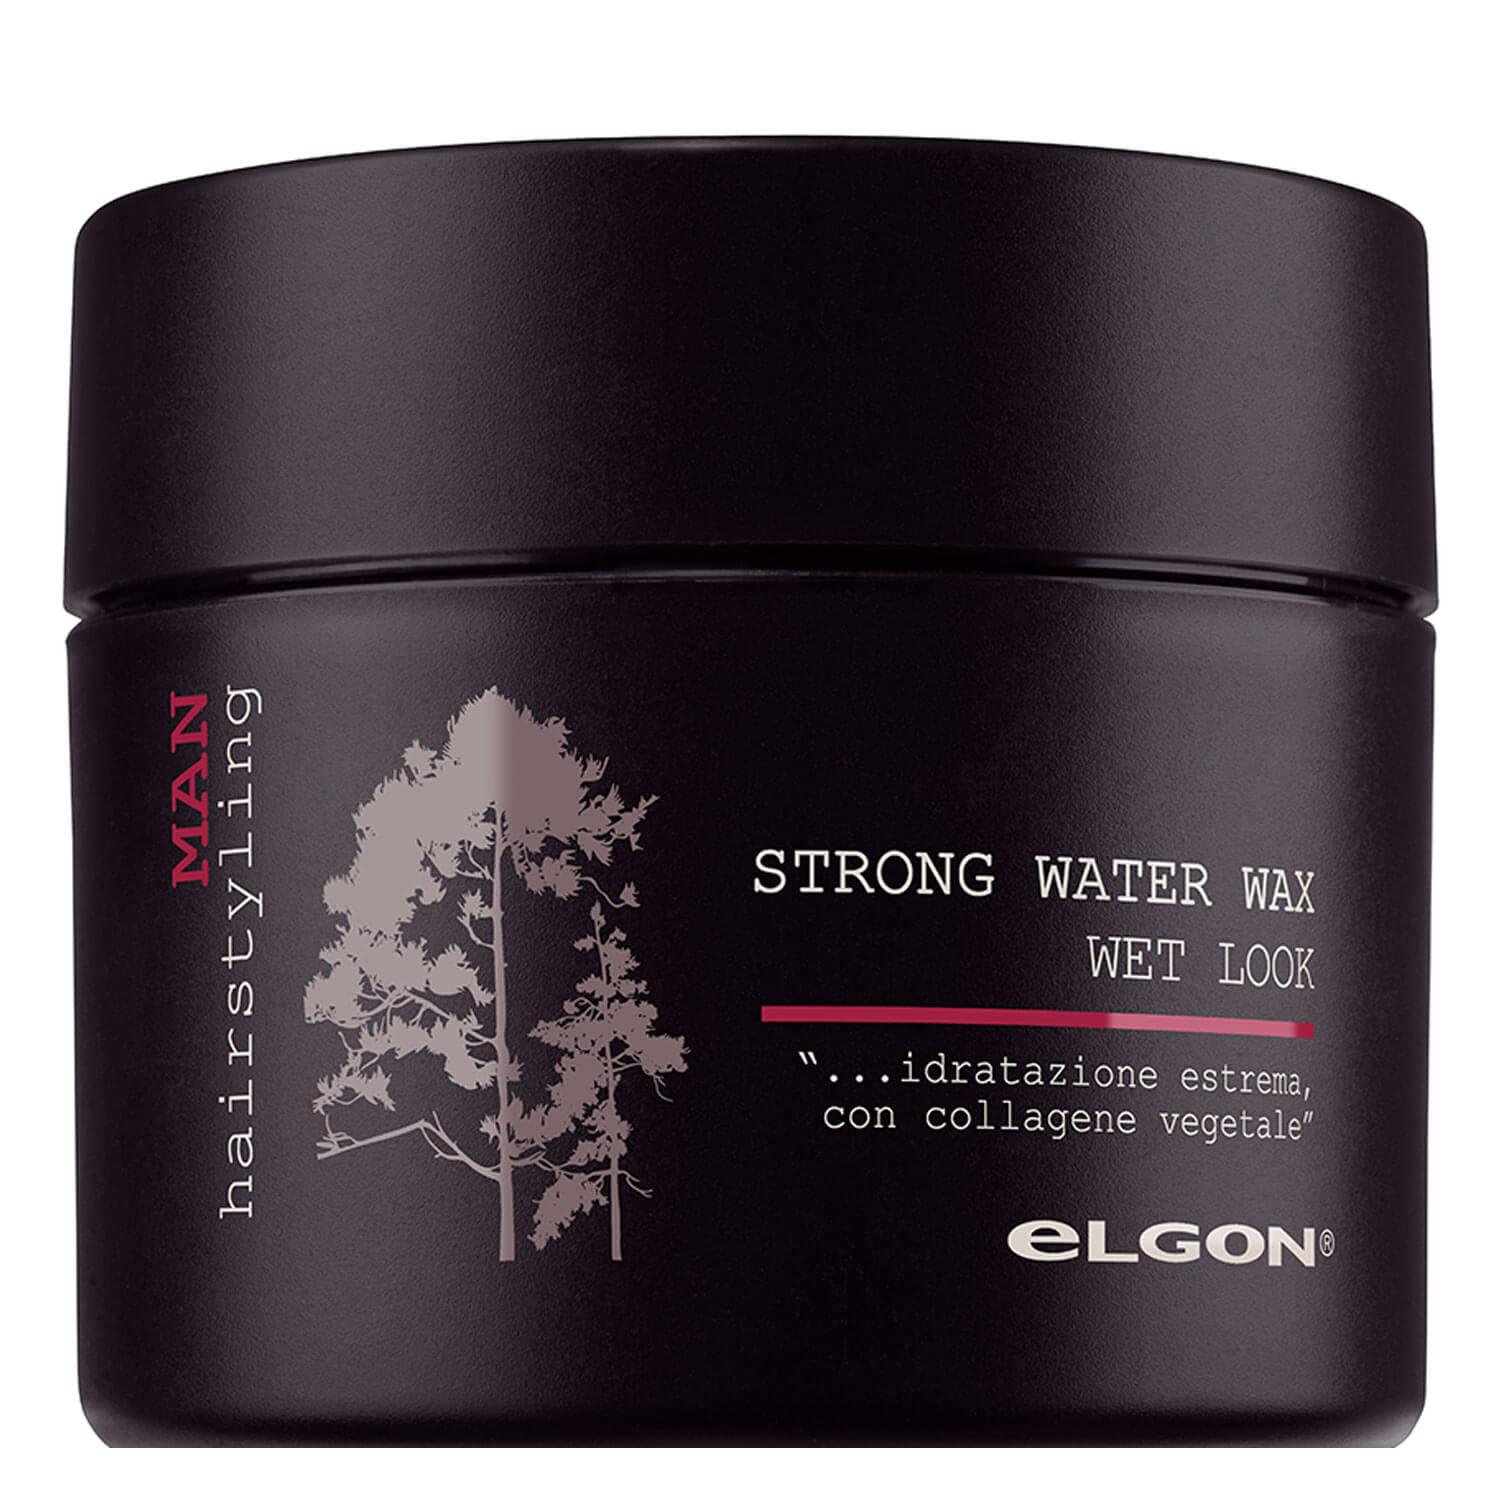 Elgon for Men - Strong Water Wax